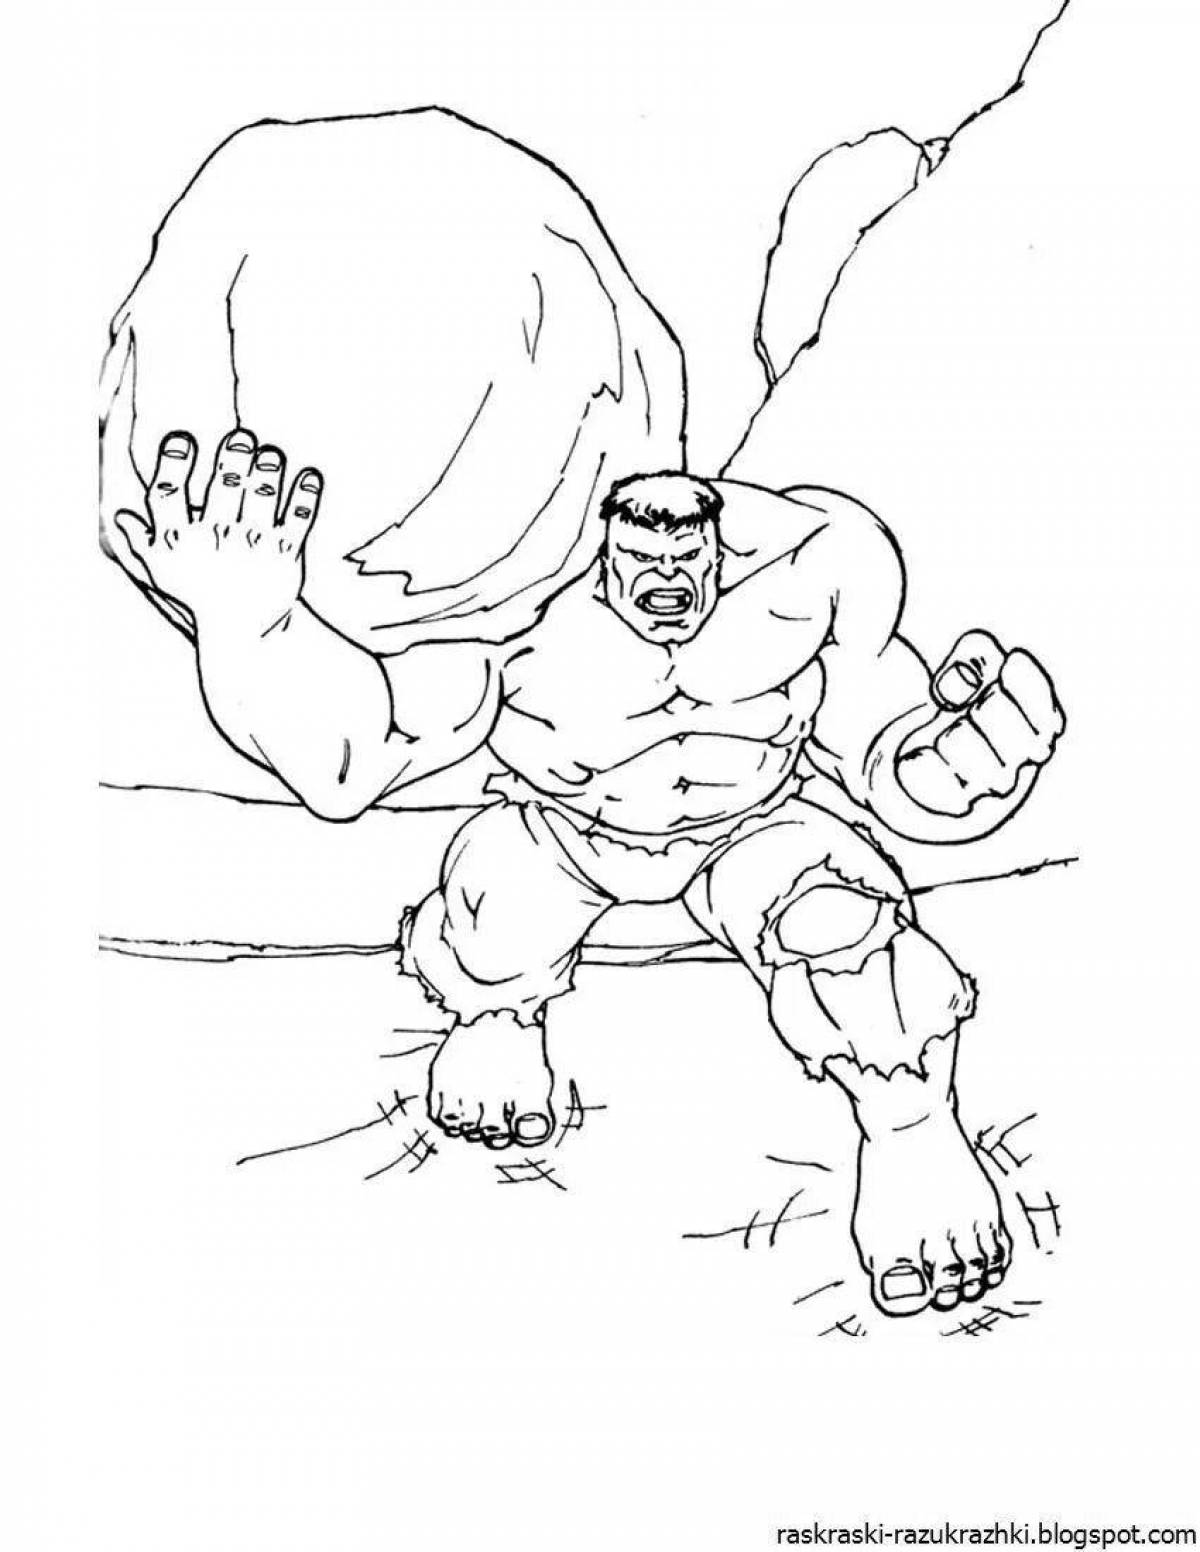 Hulk fun coloring book for 5-6 year olds